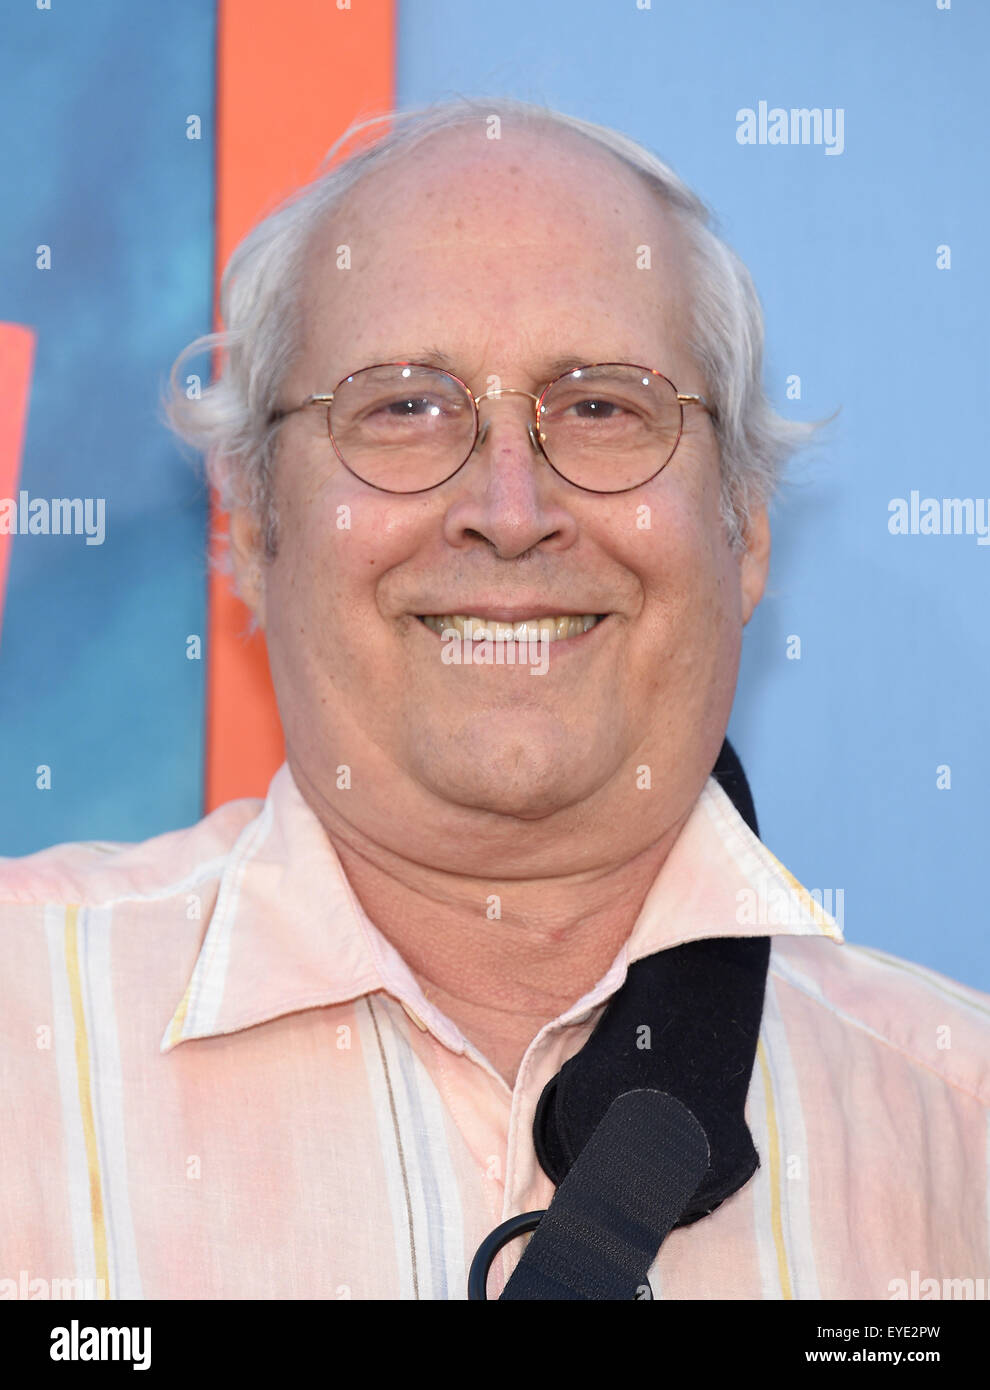 Westwood, California, USA. 27th July, 2015. Chevy Chase arrives for the premiere of the film 'Vacation' at the Village theater. Credit:  Lisa O'Connor/ZUMA Wire/Alamy Live News Stock Photo